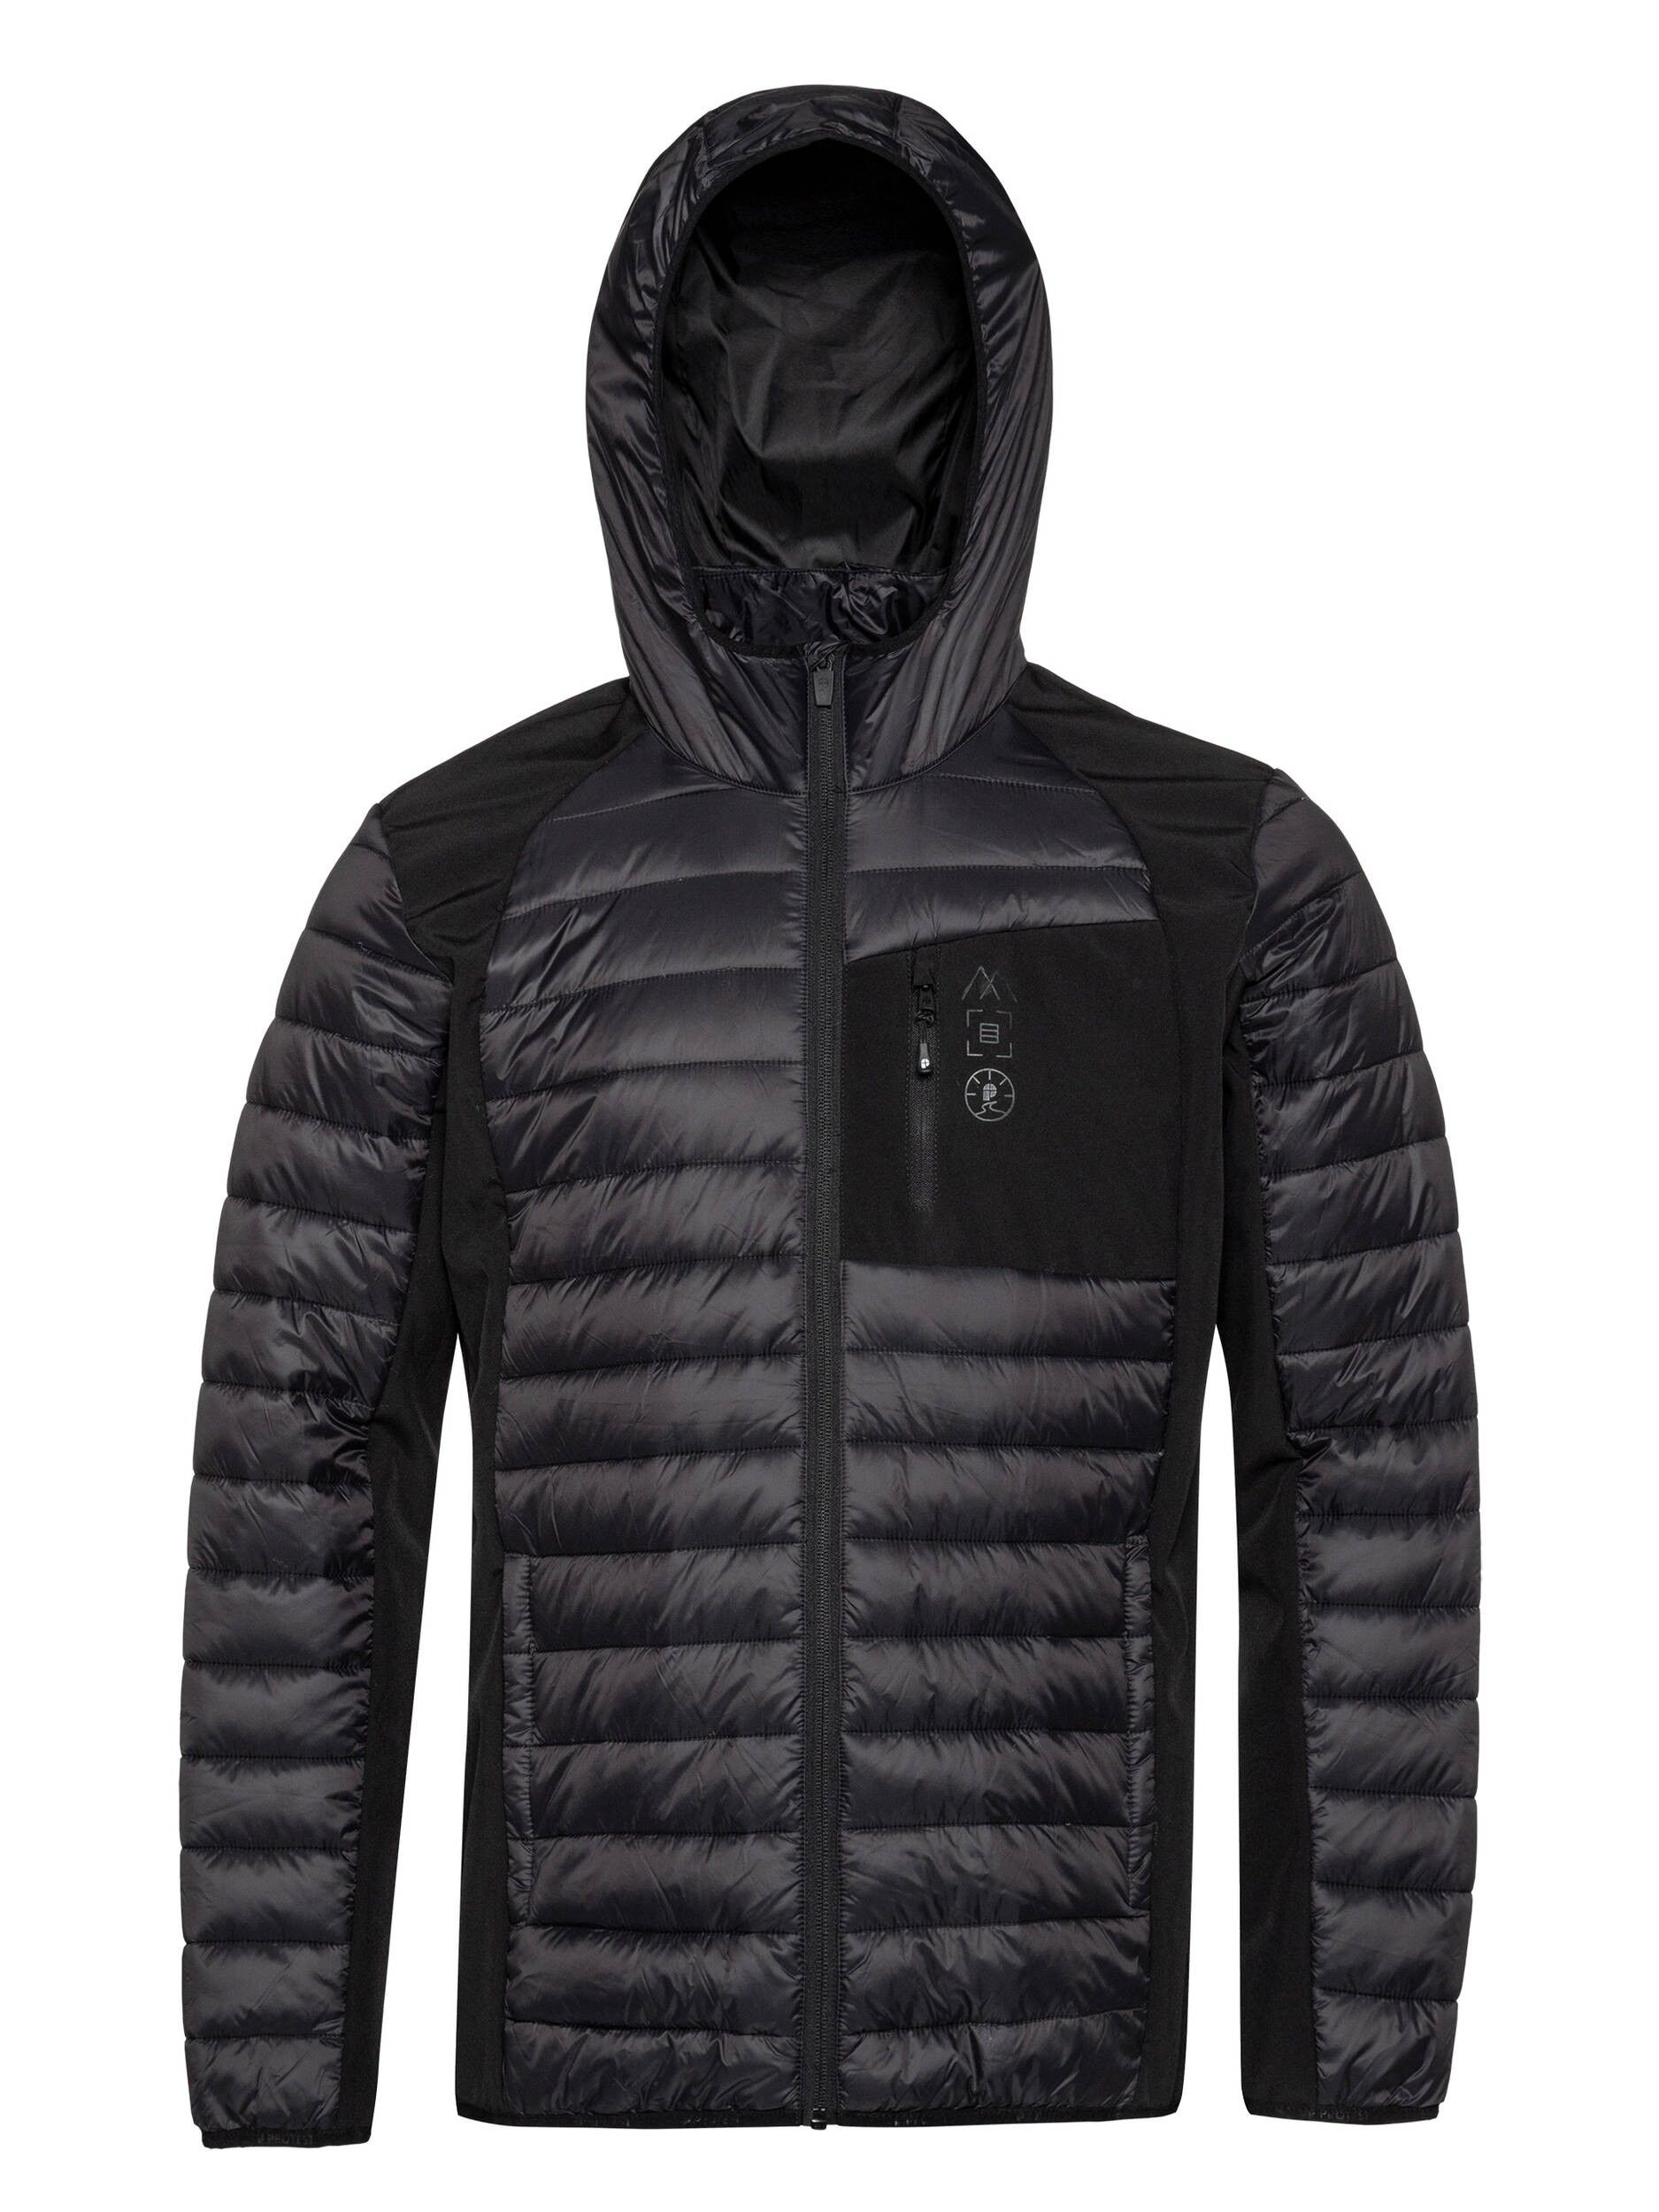 Protest Letton - Insulated jacket - Men's